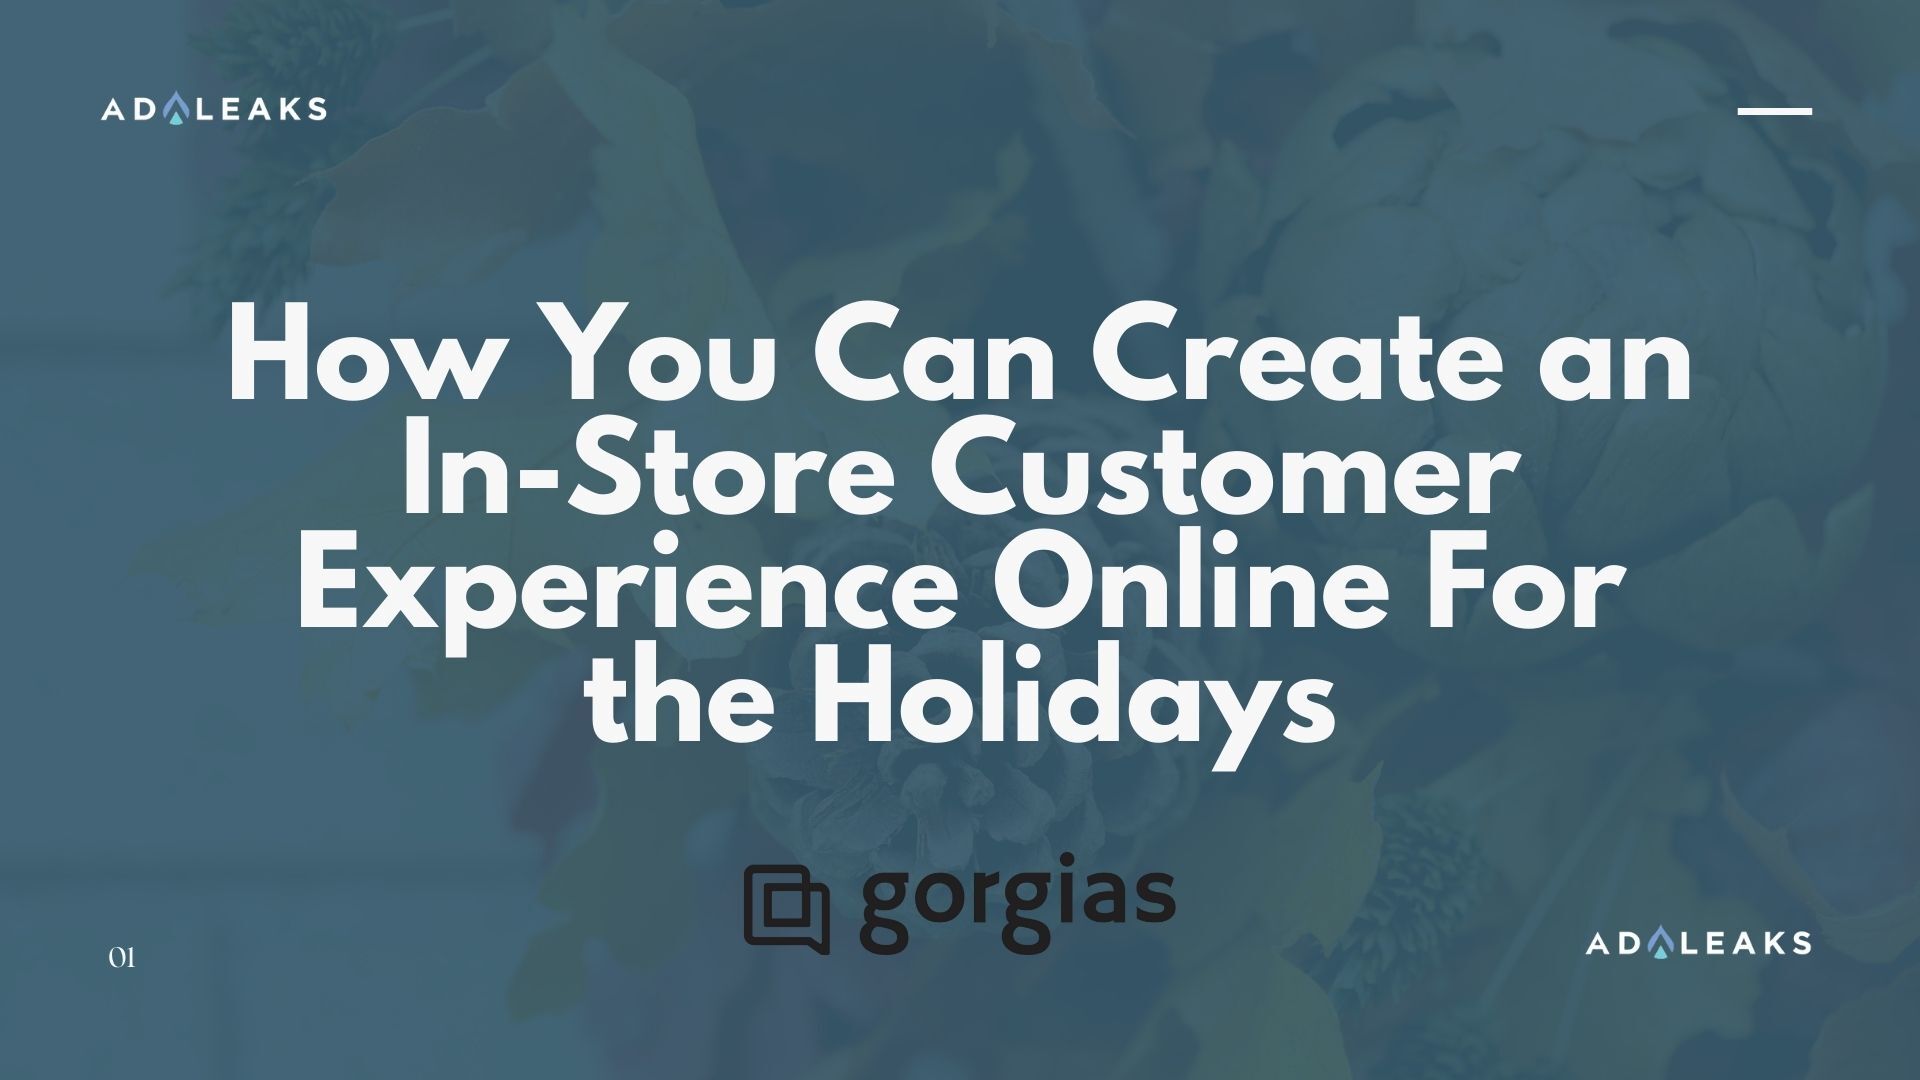 gorgias in-store customer experience featured